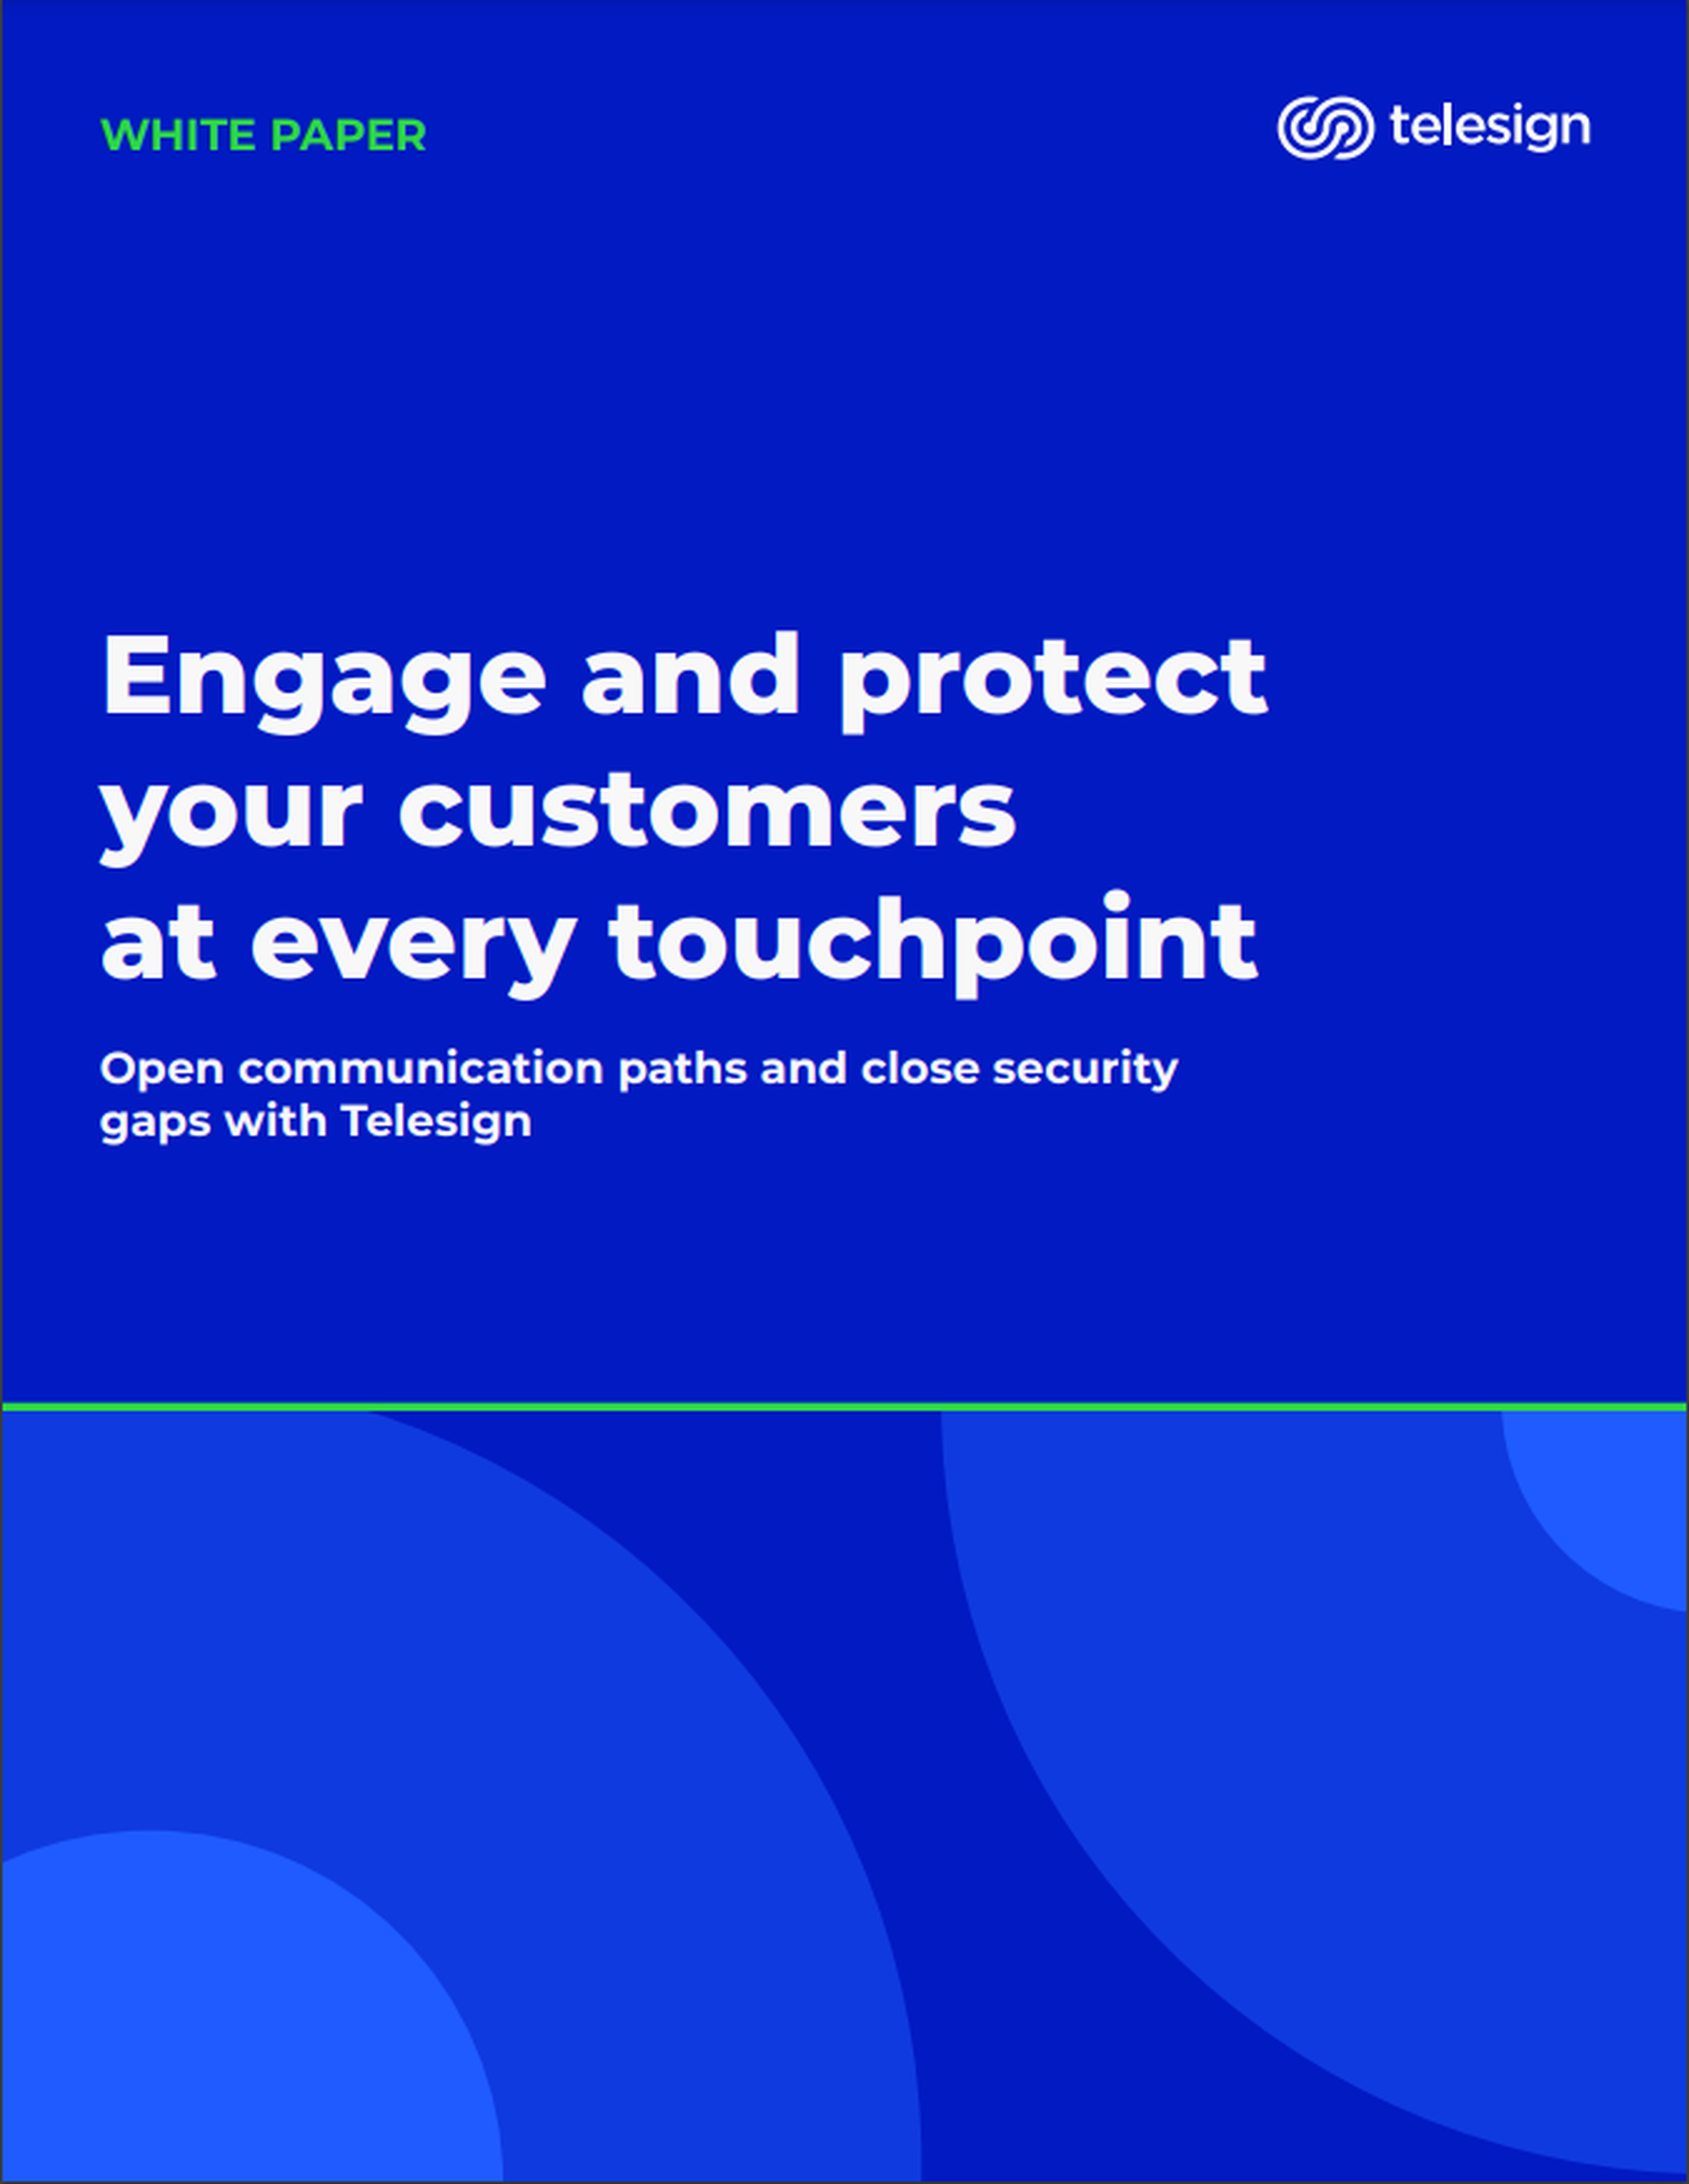 Engage and protect your customers at every touchpoint